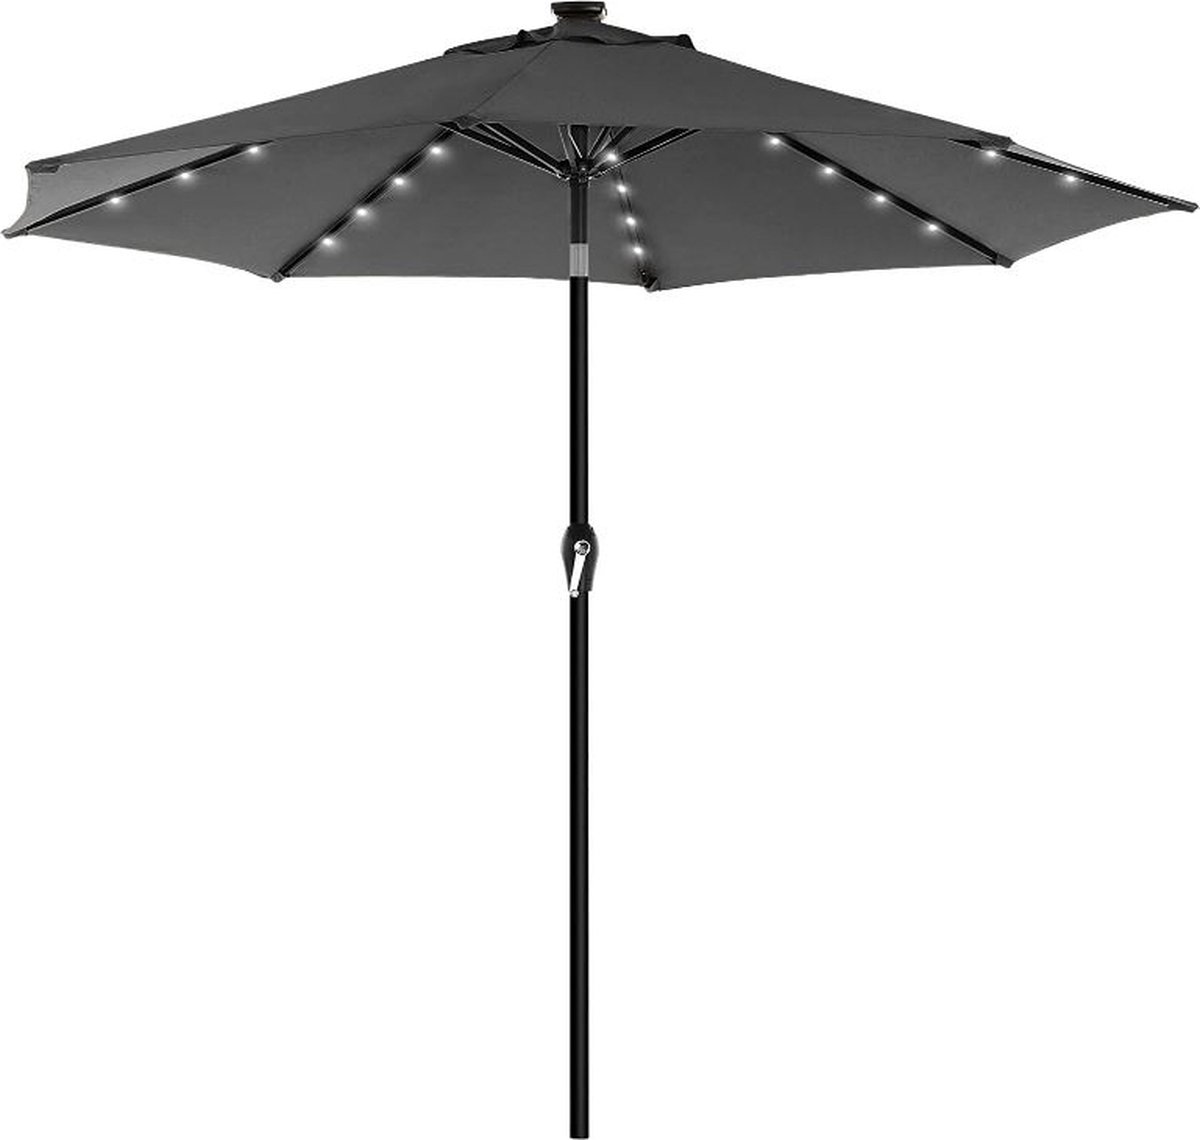 MIRA Home - Parasol - Zonnewering - Tuin - LED-verlichting - Grijs - 240x300